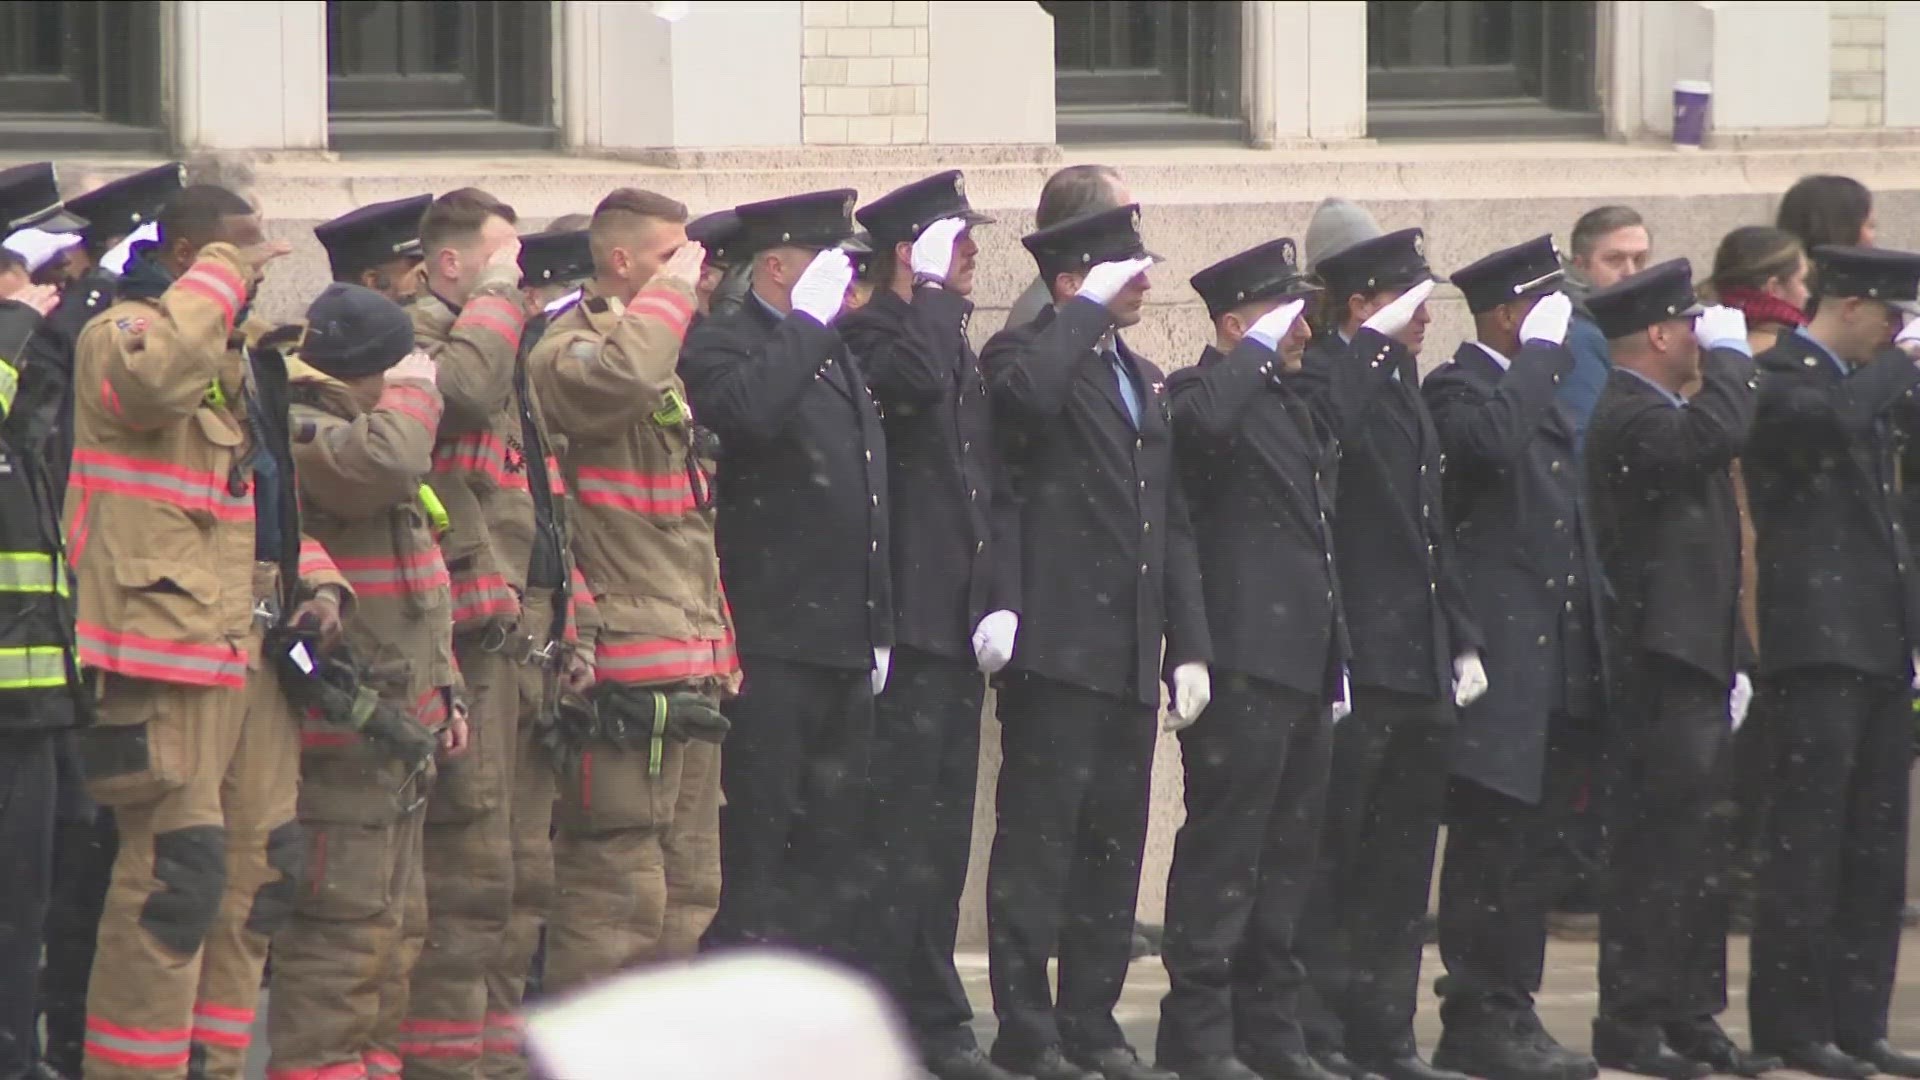 They lined up, row after row, in their dress uniforms with polished shoes and crisp, white gloves, raised in a salute to honor Arno.